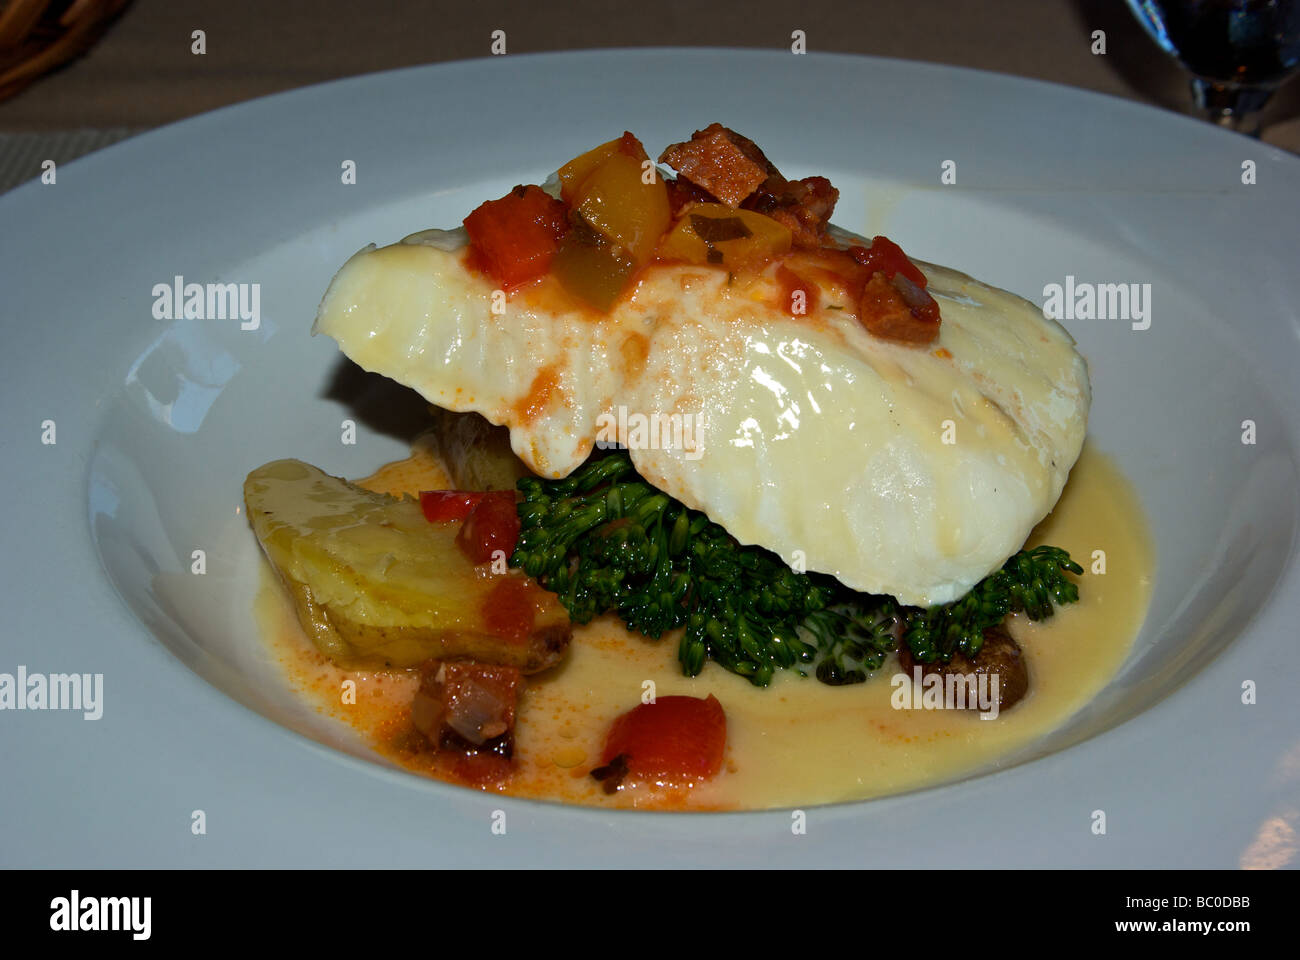 Piperade sauce served over oven baked halibut with fingerling potatoes and steamed broccolini Stock Photo